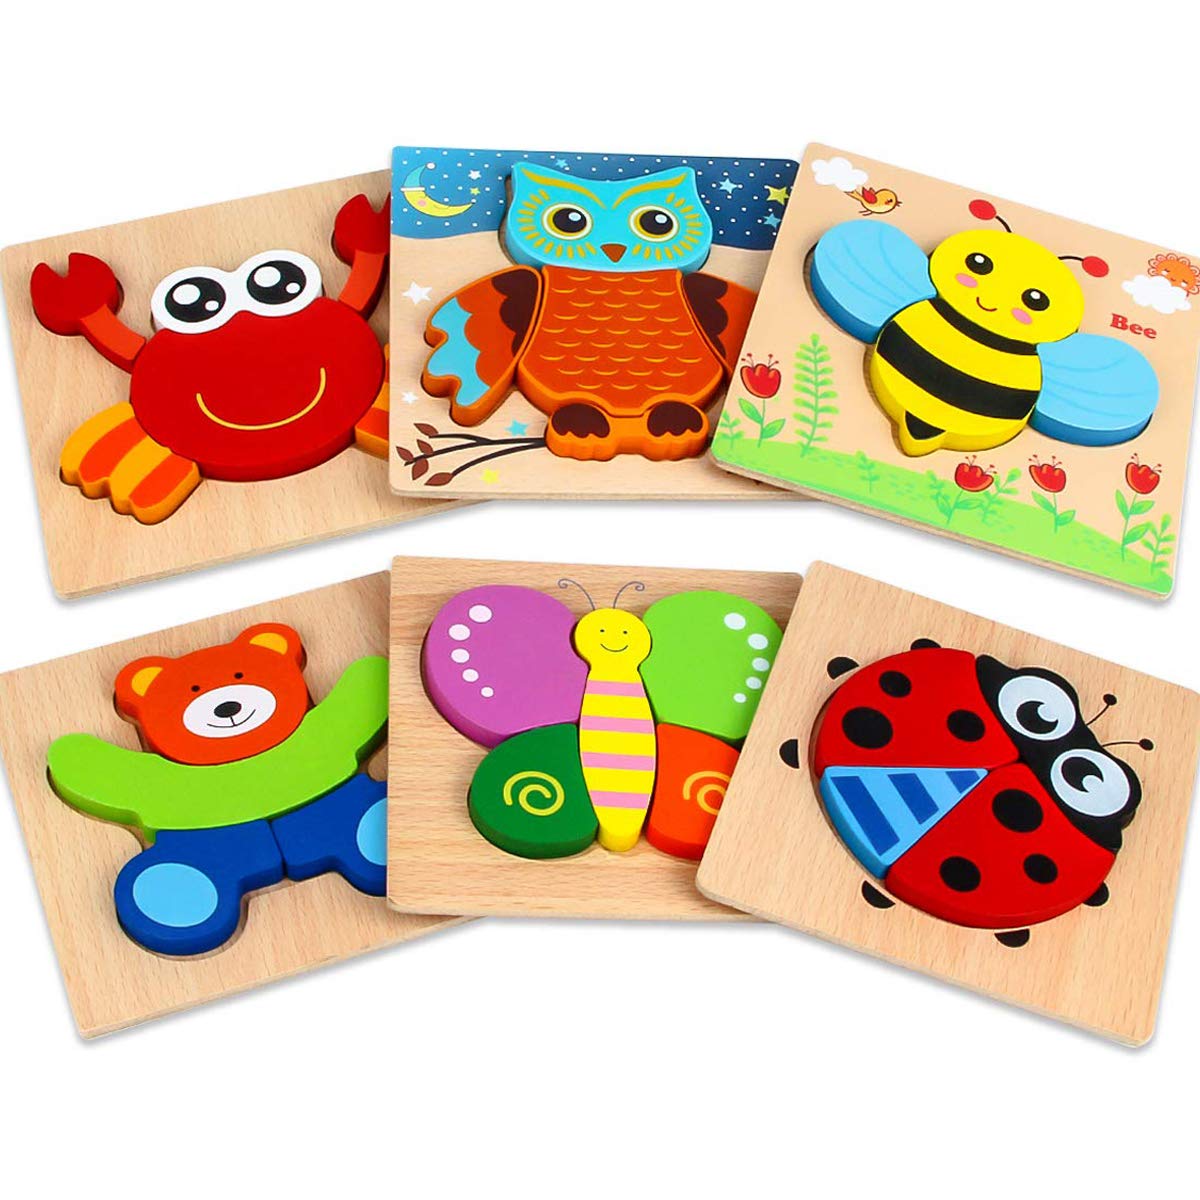 Dreampark Wooden Jigsaw Puzzles, 6 Pack Animal Puzzles for Toddlers Kids 1 2 3 Years Old Educational Toys for Boys and Girls